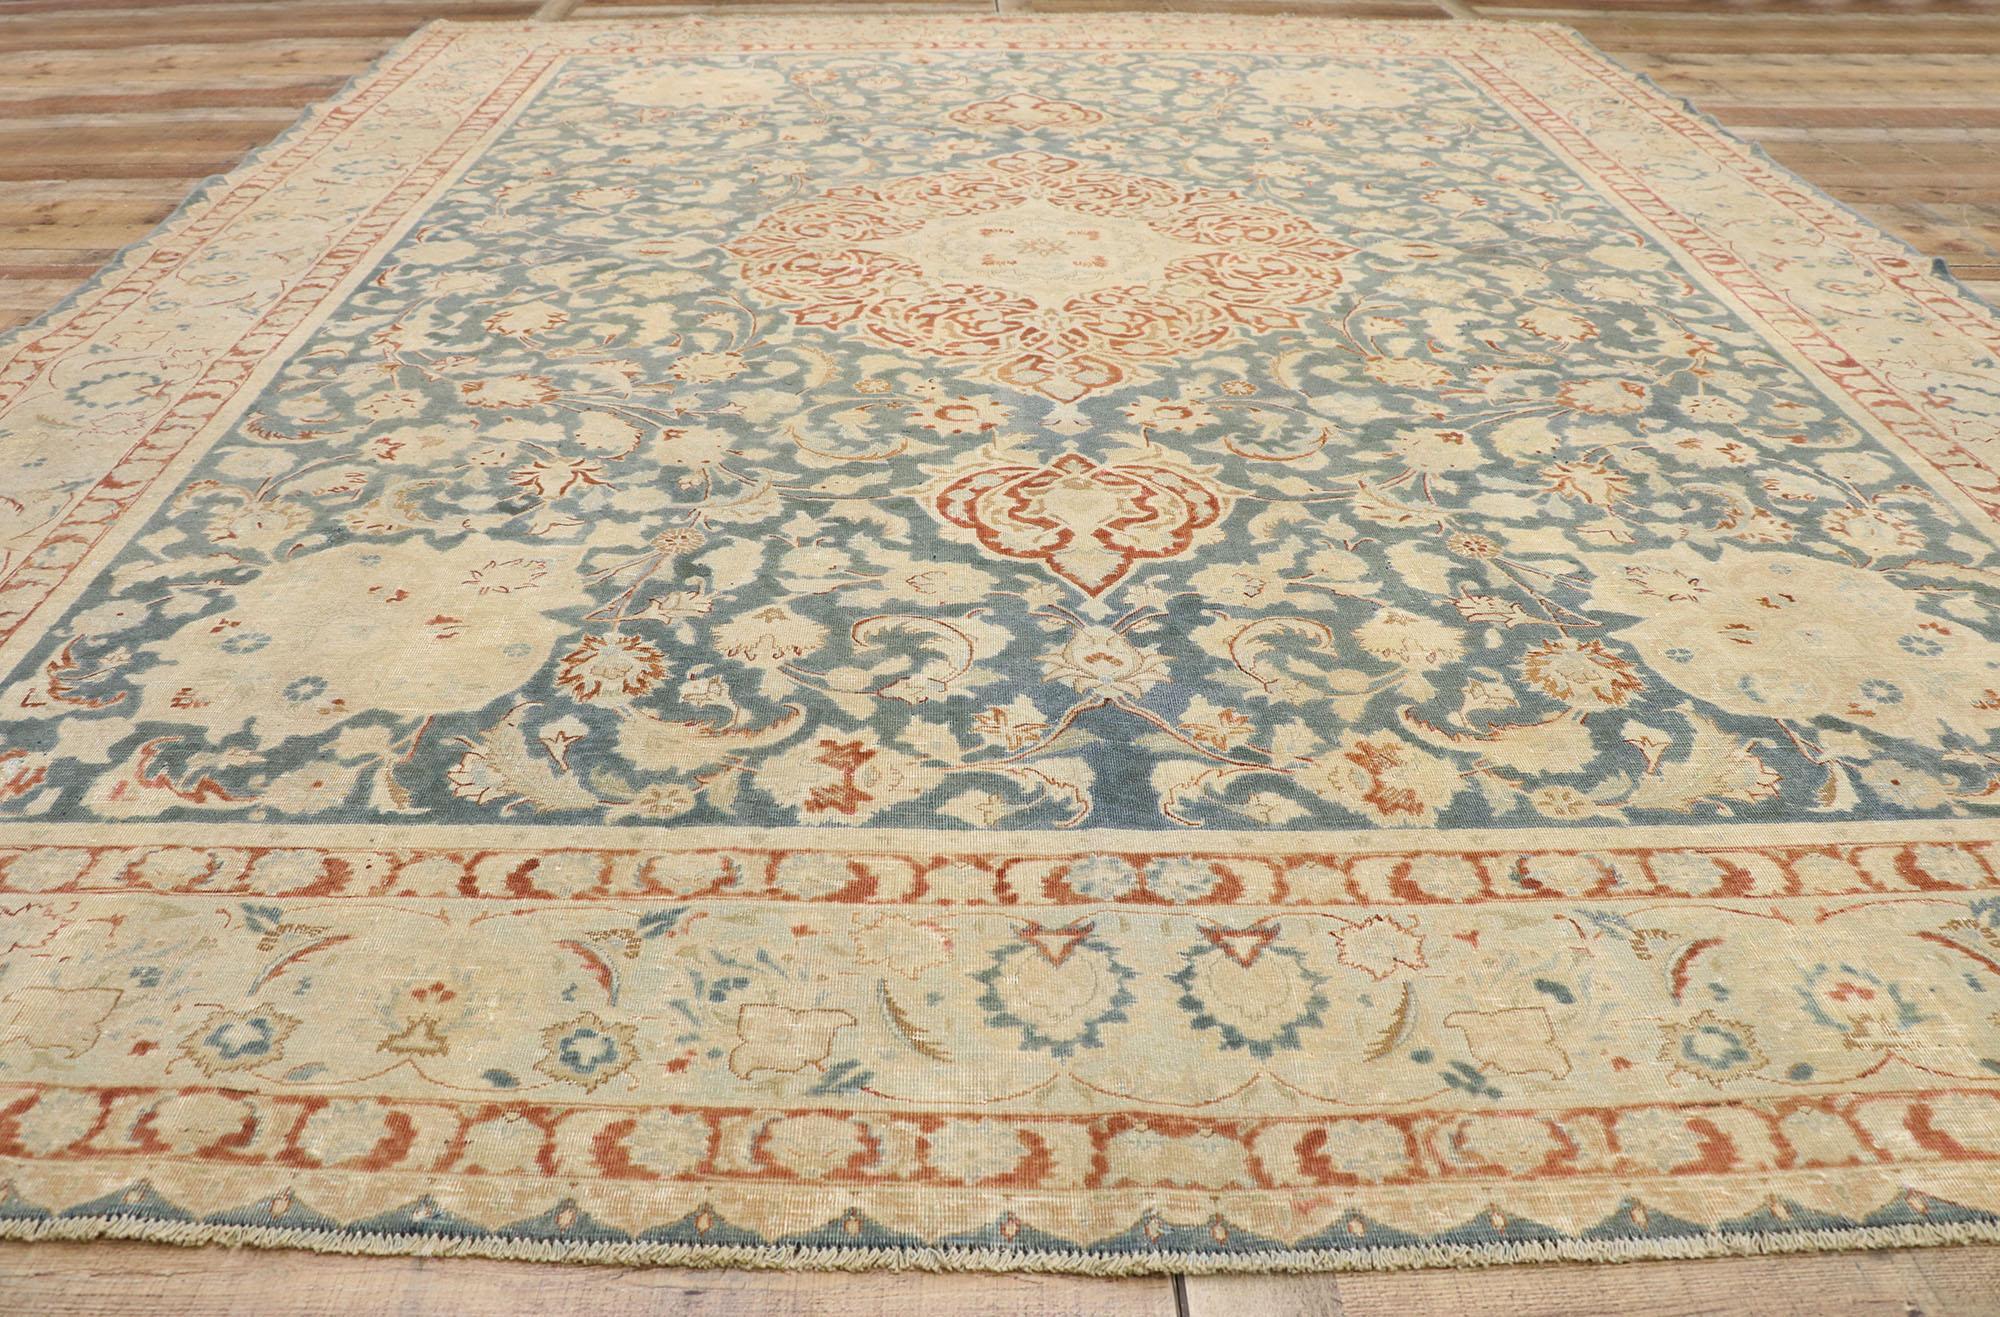 20th Century Distressed Antique Persian Heriz Design Rug with English Chintz Rustic Style